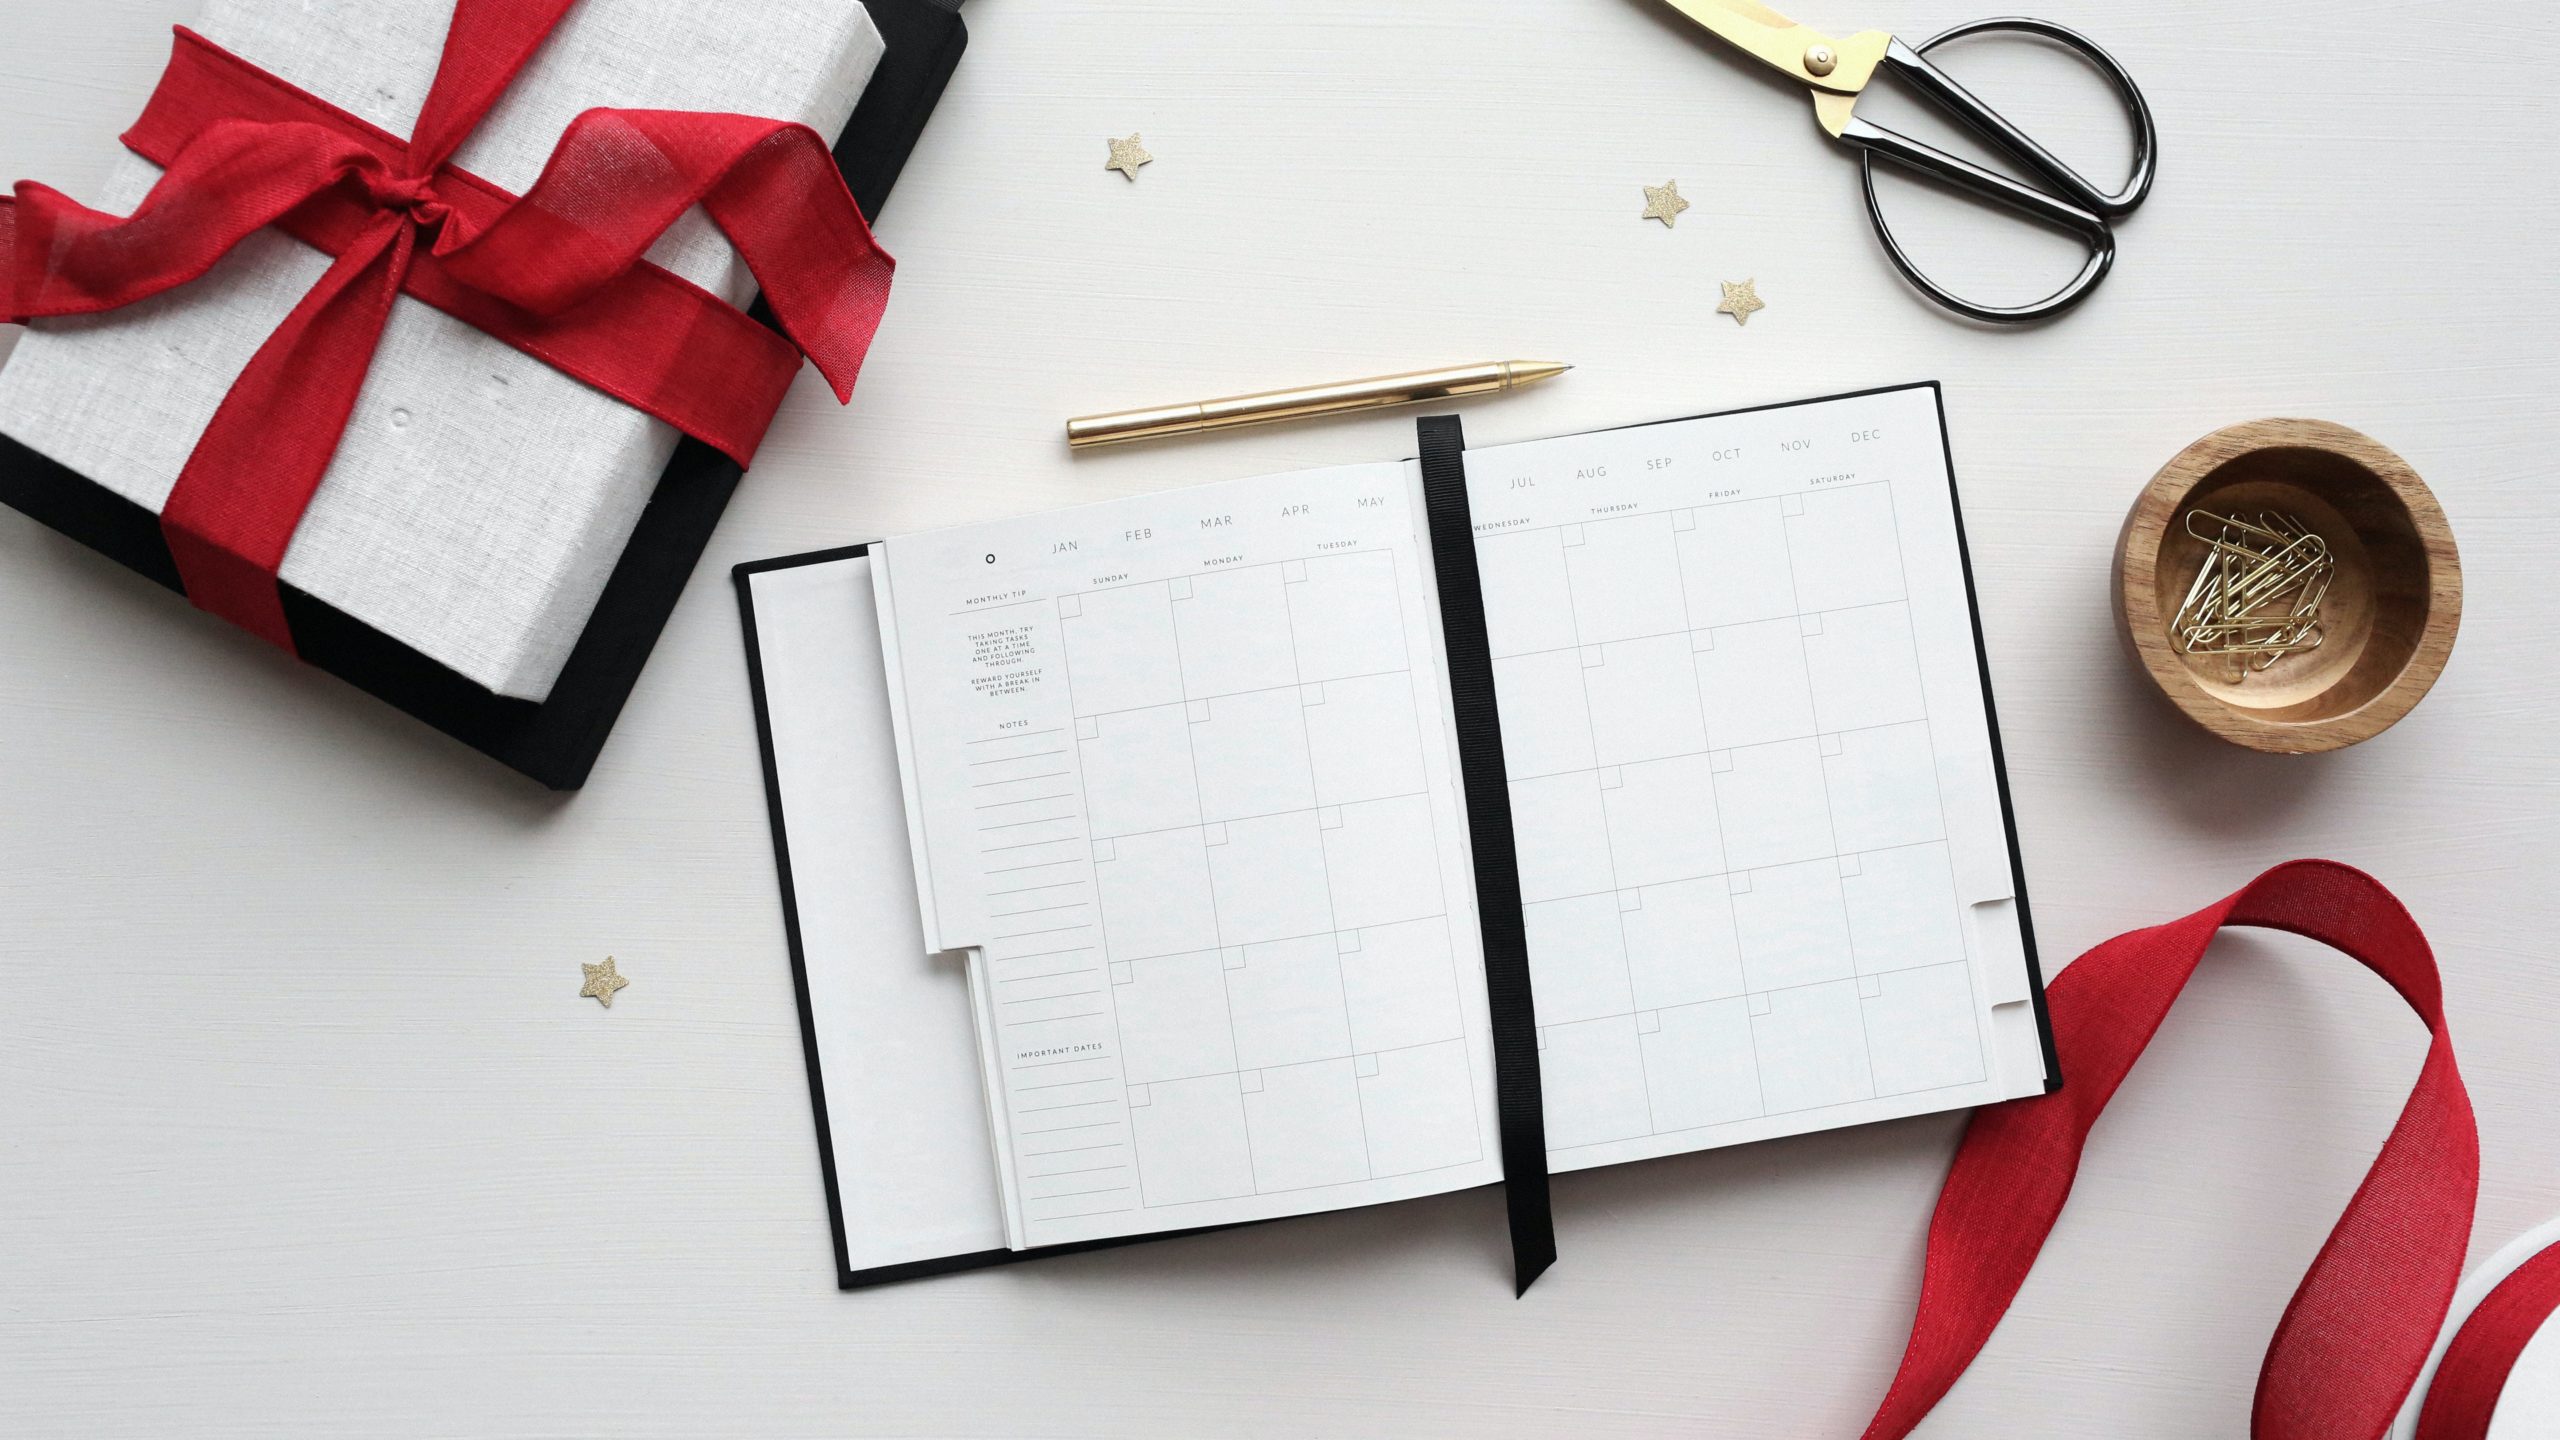 The Holiday Limbo Week: How To Approach It As A Creative Business Owner